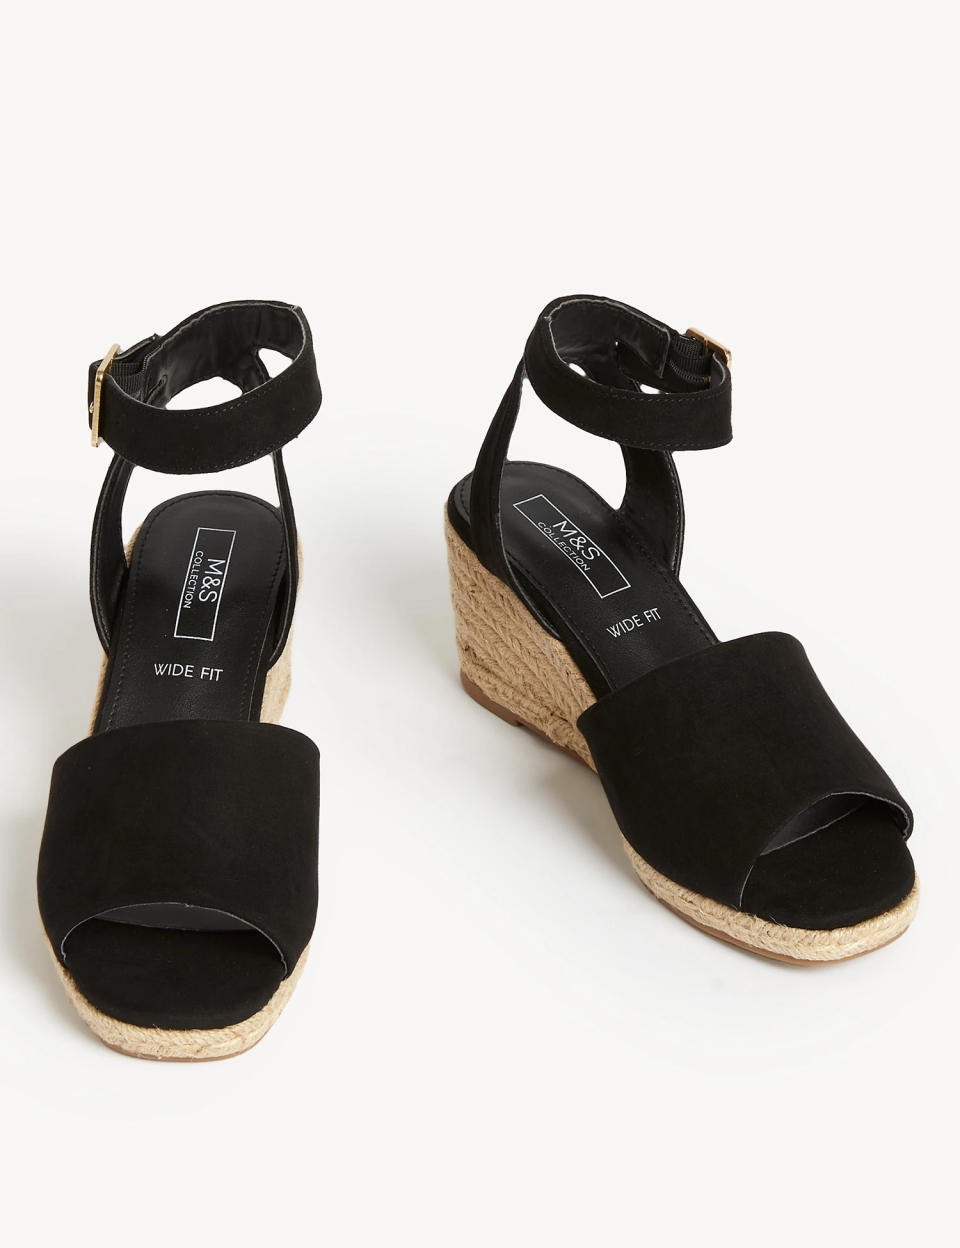 For a bit of height without sacrificing comfort, these wedges are the perfect buy. (M&S)